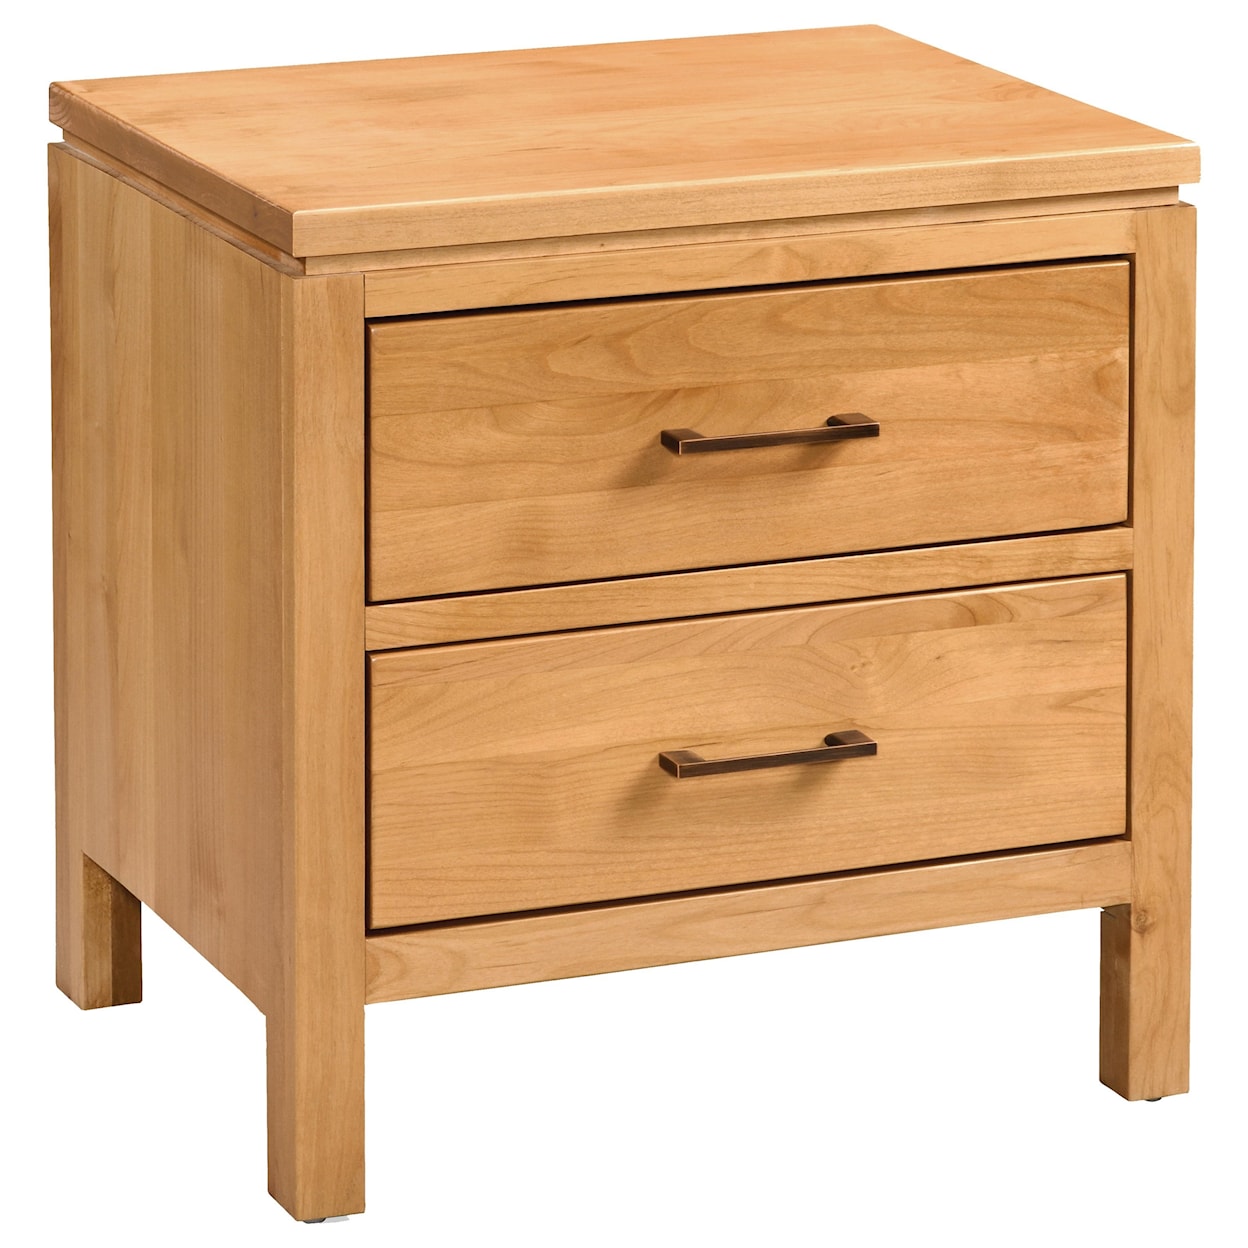 Archbold Furniture 2 West Contemporary 2 Drawer Nightstand